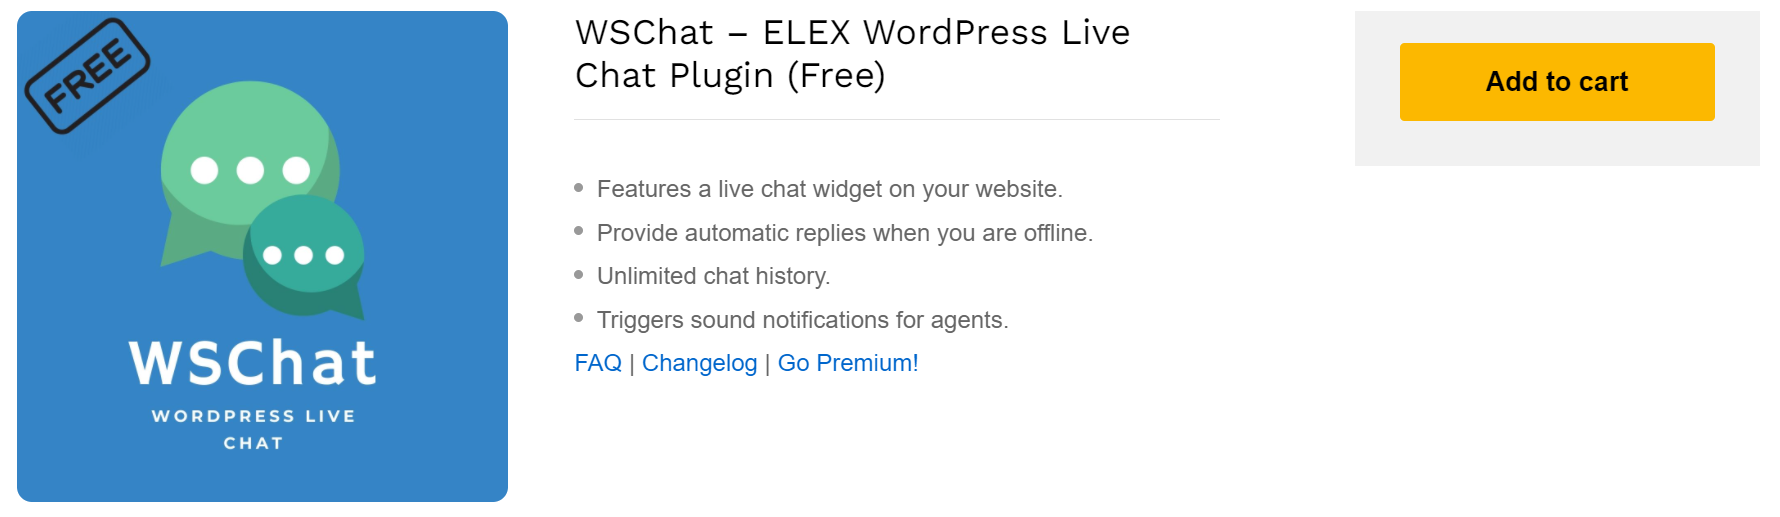 Best Free Live Chat Plugins for WordPress | WSChat – ELEX WordPress Live Chat Plugin